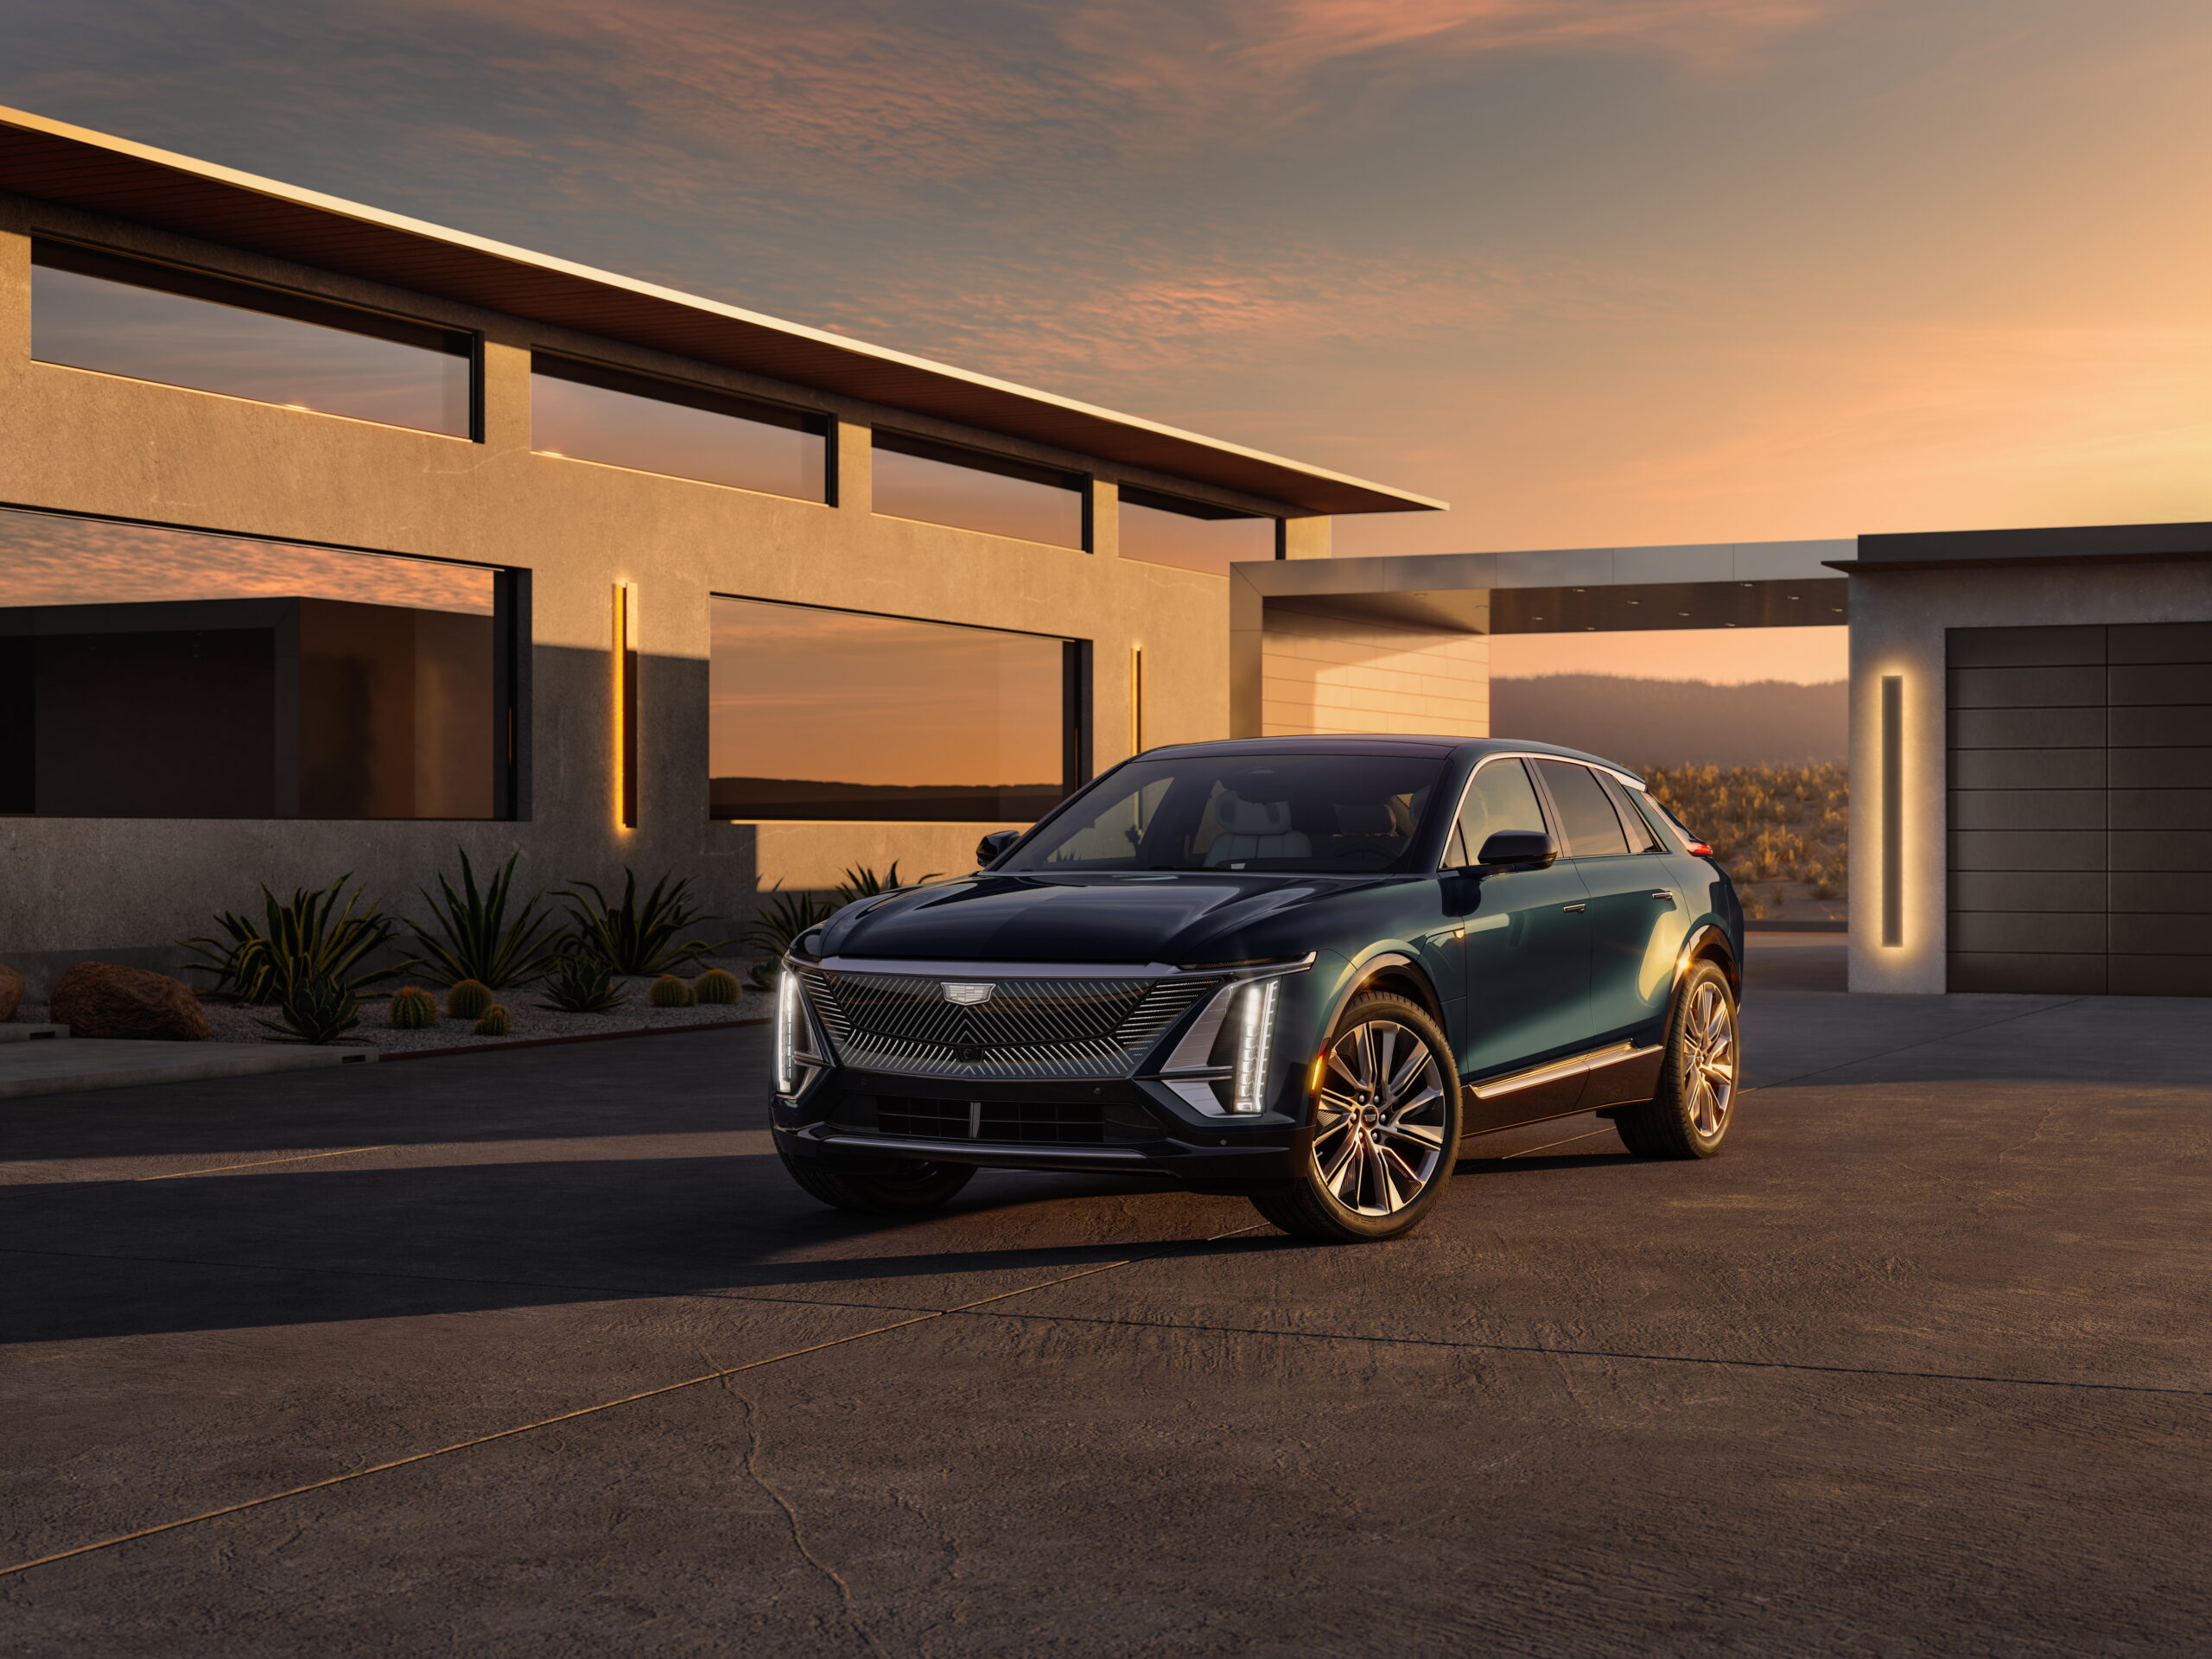 Cadillac obtains full 7,500 tax credit for Lyriq EV after brief pause